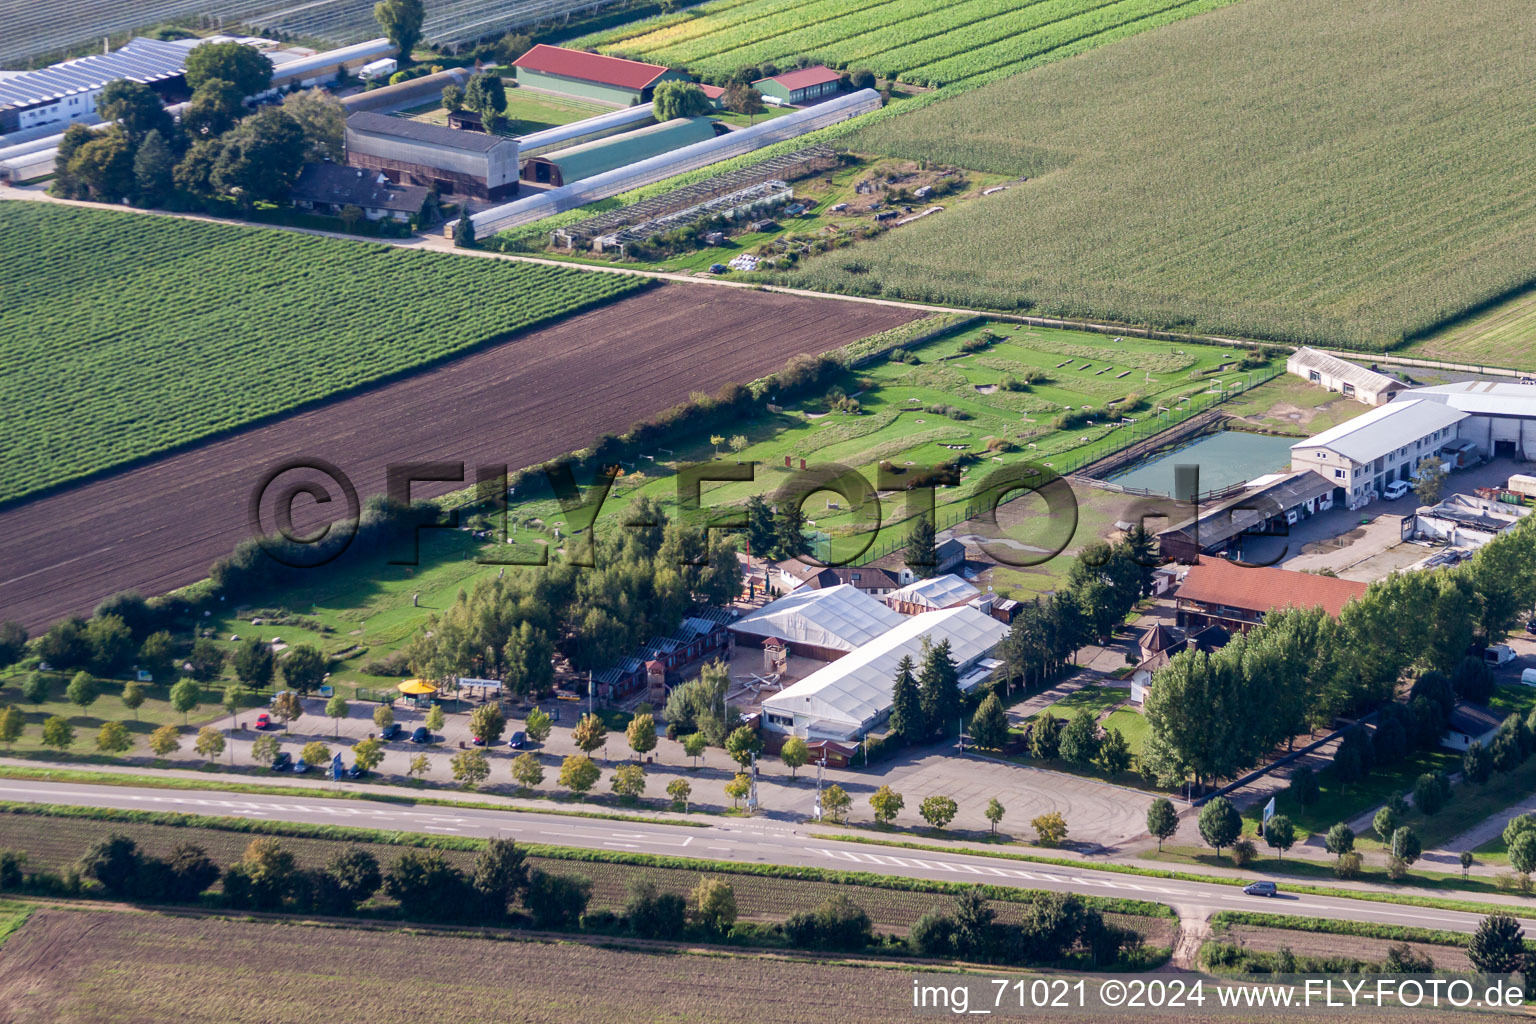 Aerial photograpy of Adamshof foot golf course in Kandel in the state Rhineland-Palatinate, Germany